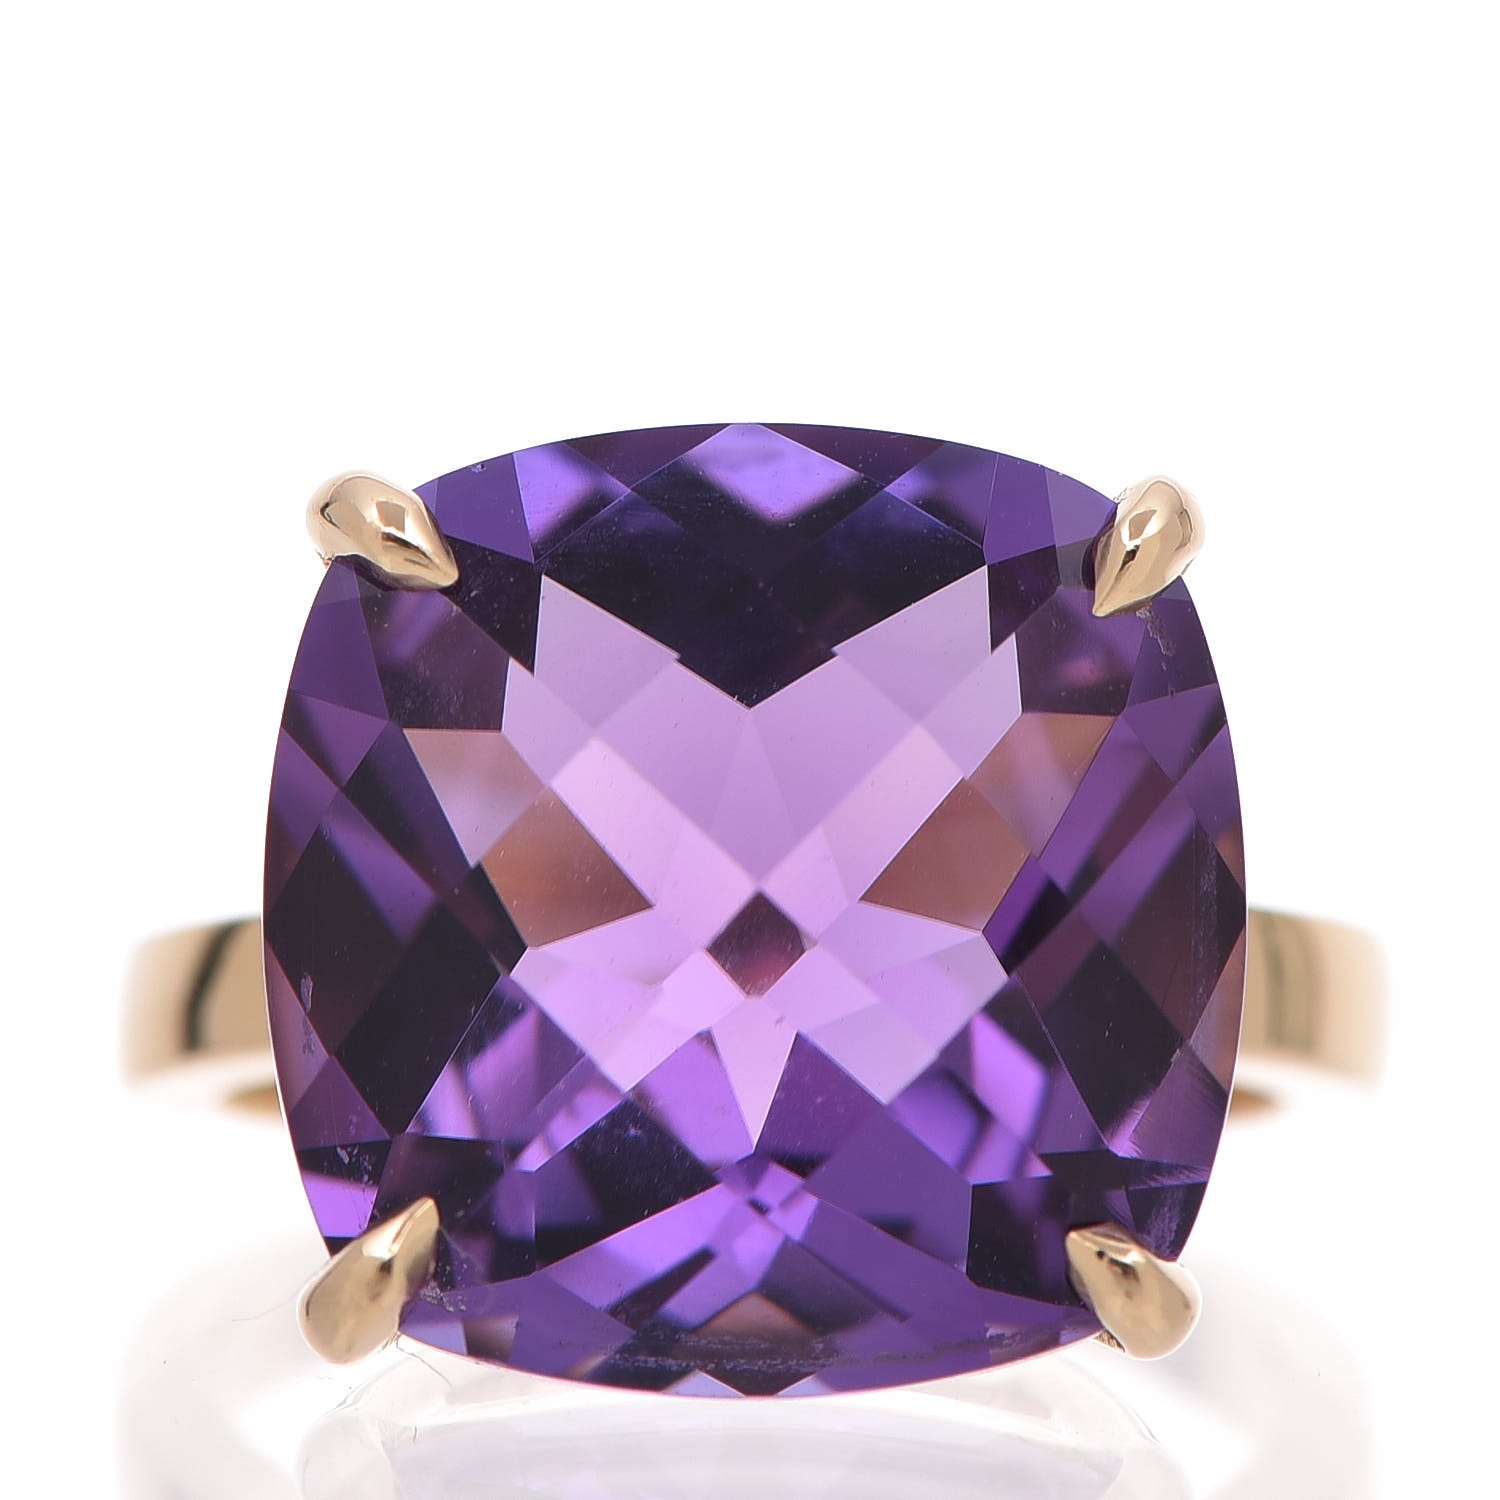 TIFFANY 18K Yellow Gold Amethyst Sparklers Cocktail Ring 50 5.25 300449